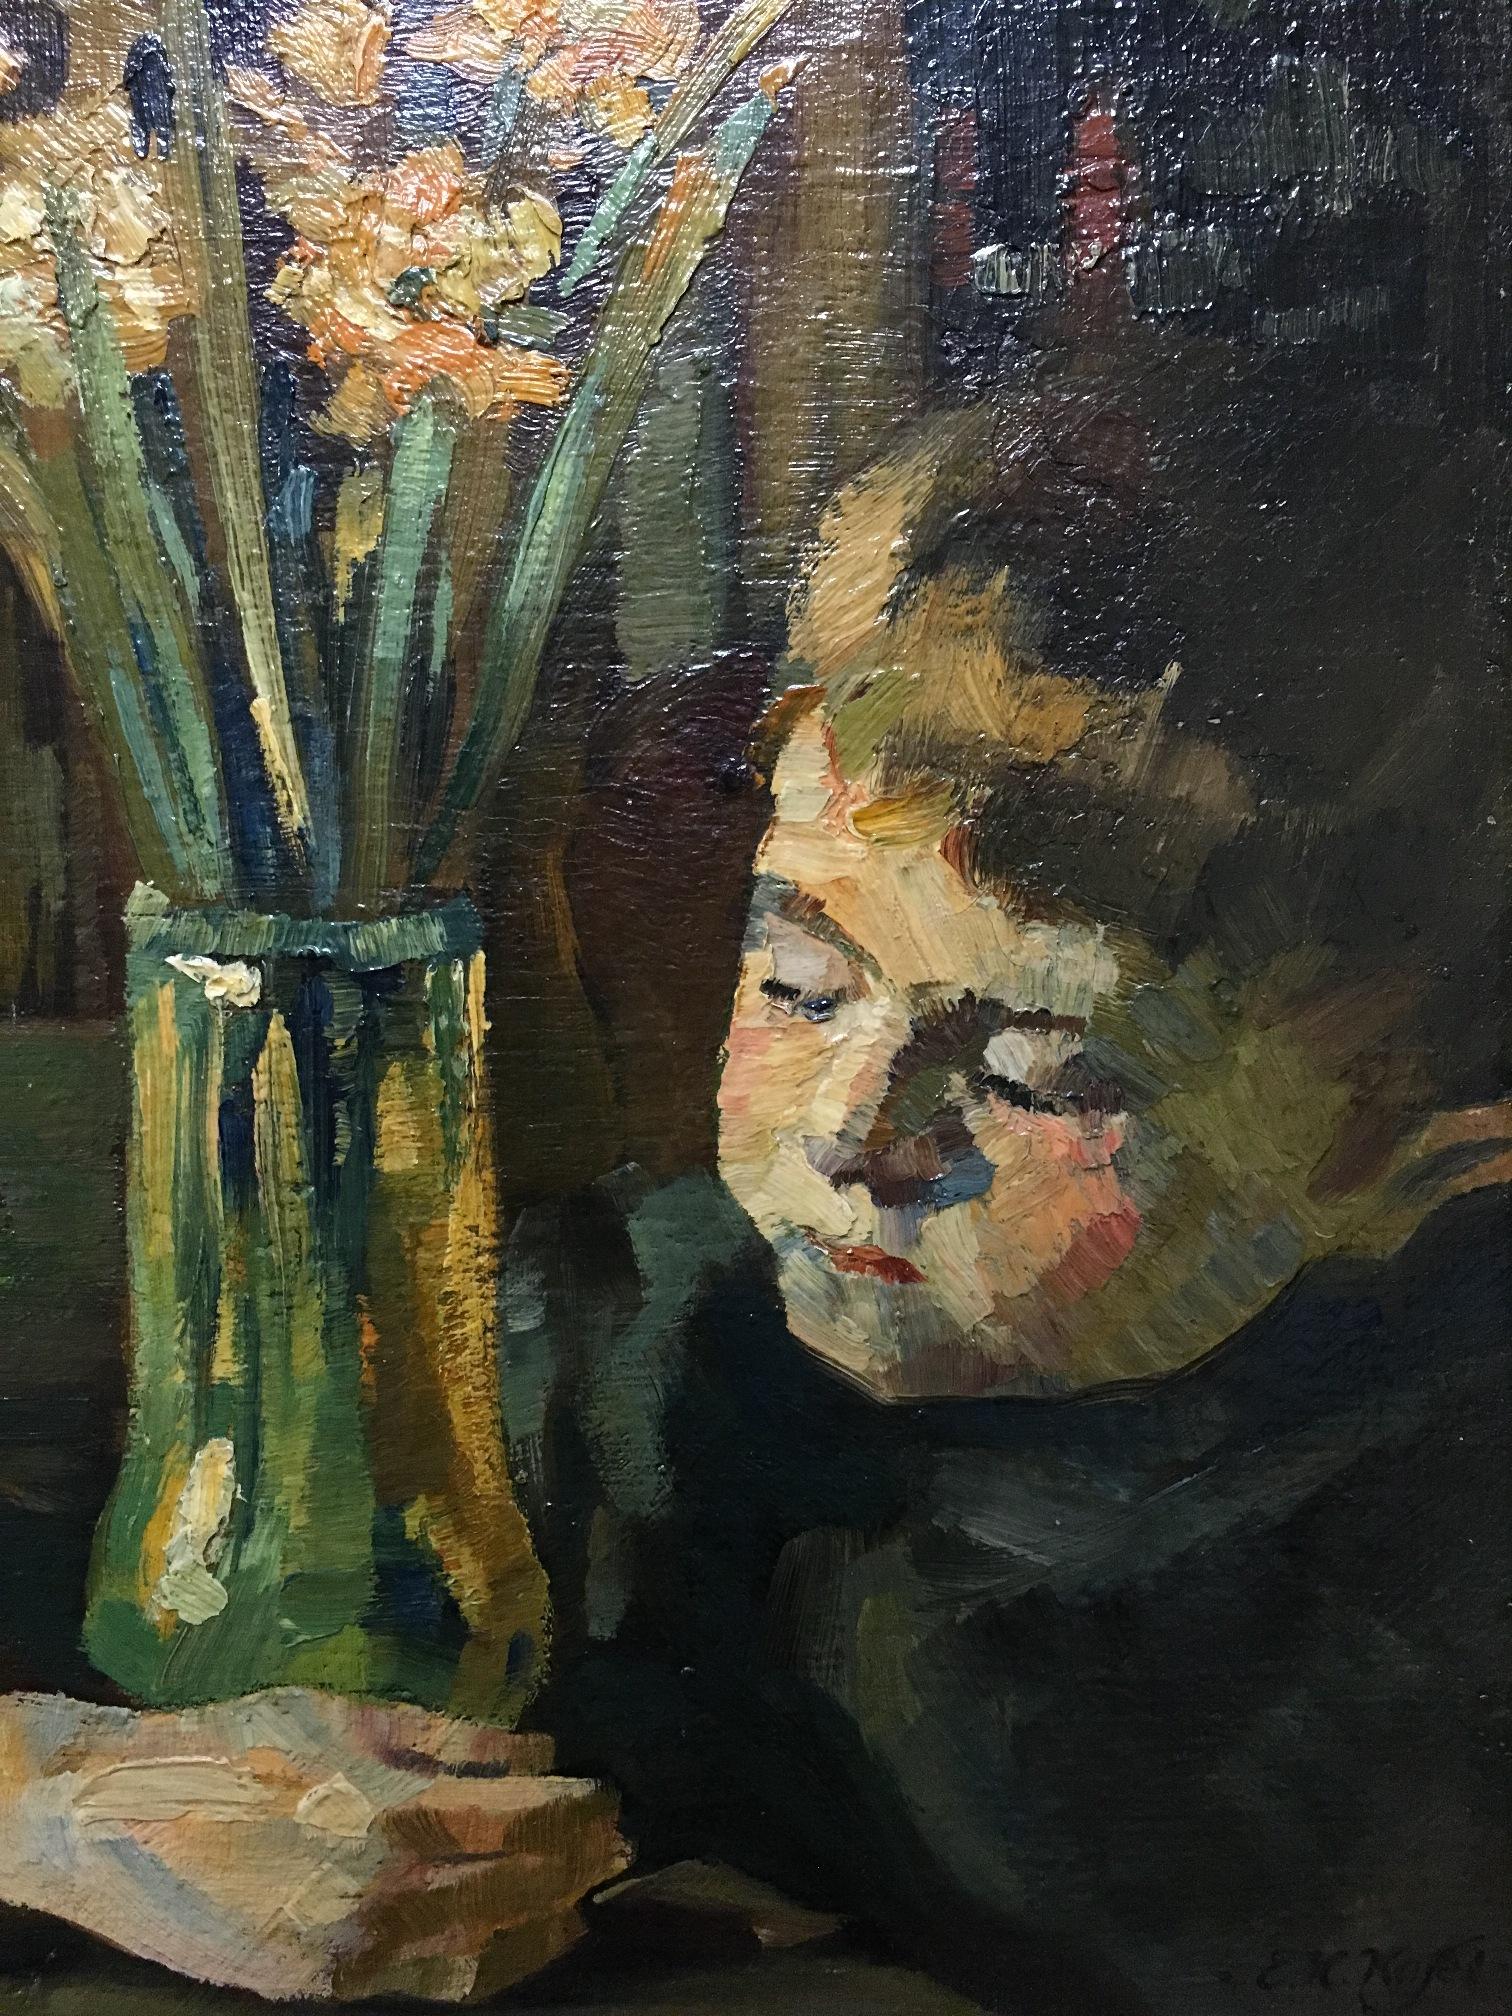 Impressionist oil on canvas painting mounted on board.
Signed. 20th century.
The fine quality painting depicting a tranquil boy seated in a traditional home with his arm around a glass vase containing an assorted floral bouquet. 
Framed in wooden